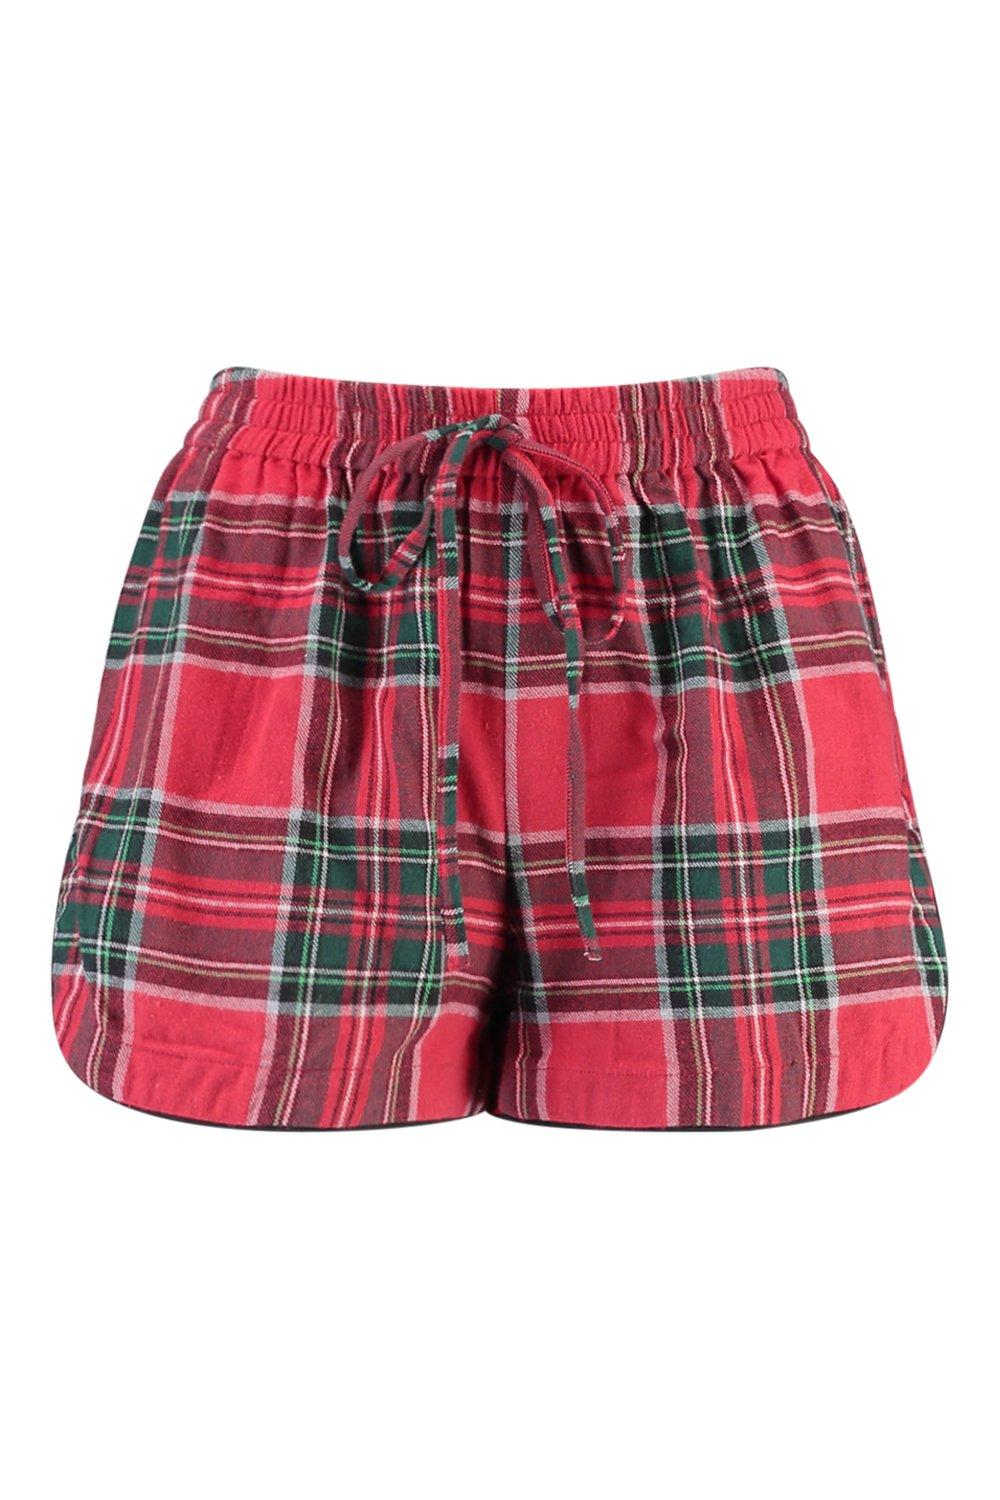 Mix And Match Flannel Pj Shorts | boohoo